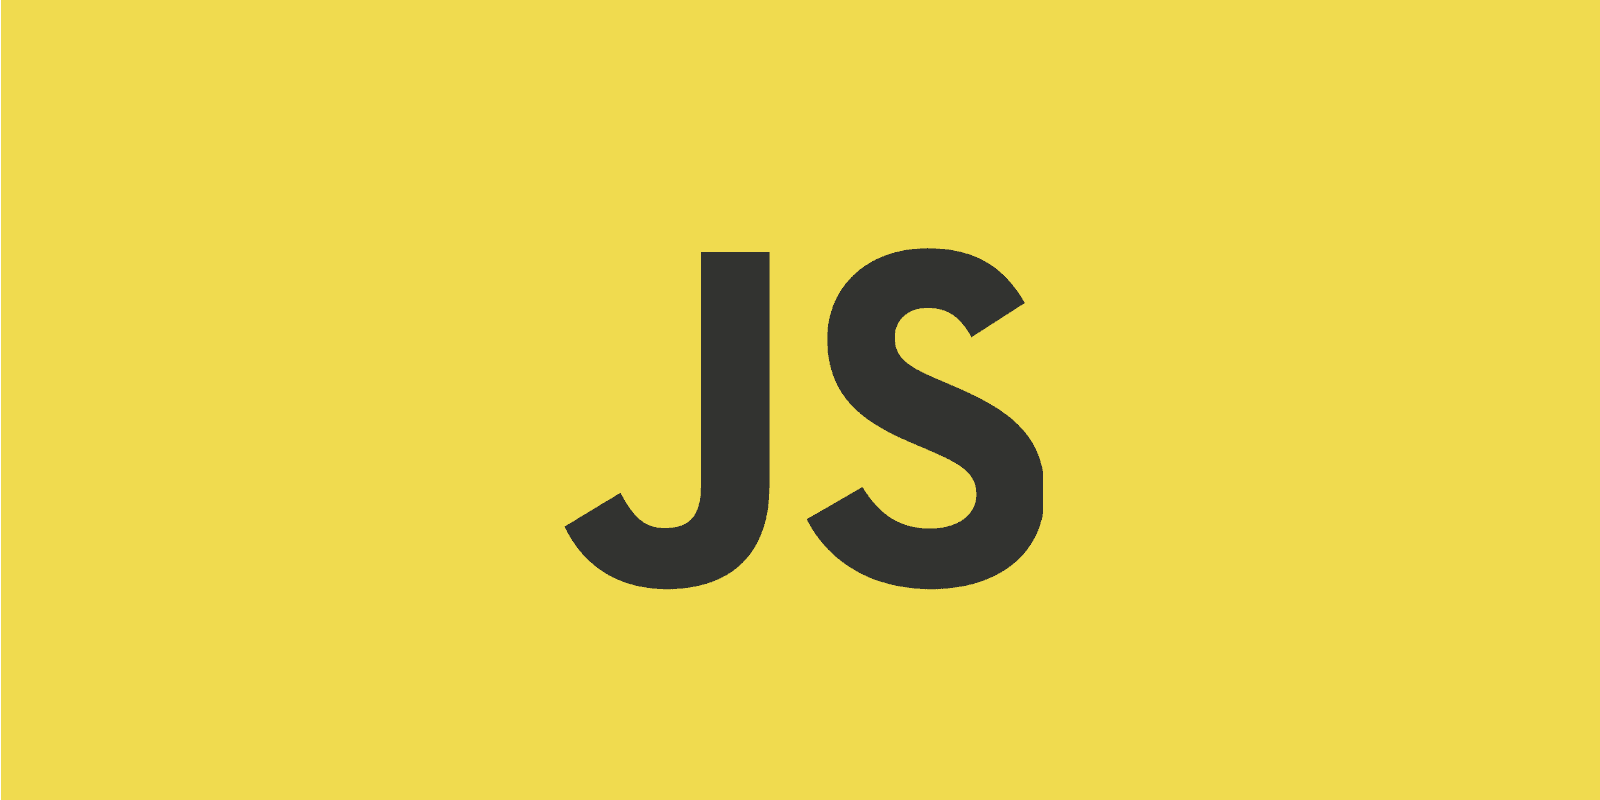 How to copy/clone objects in javascript